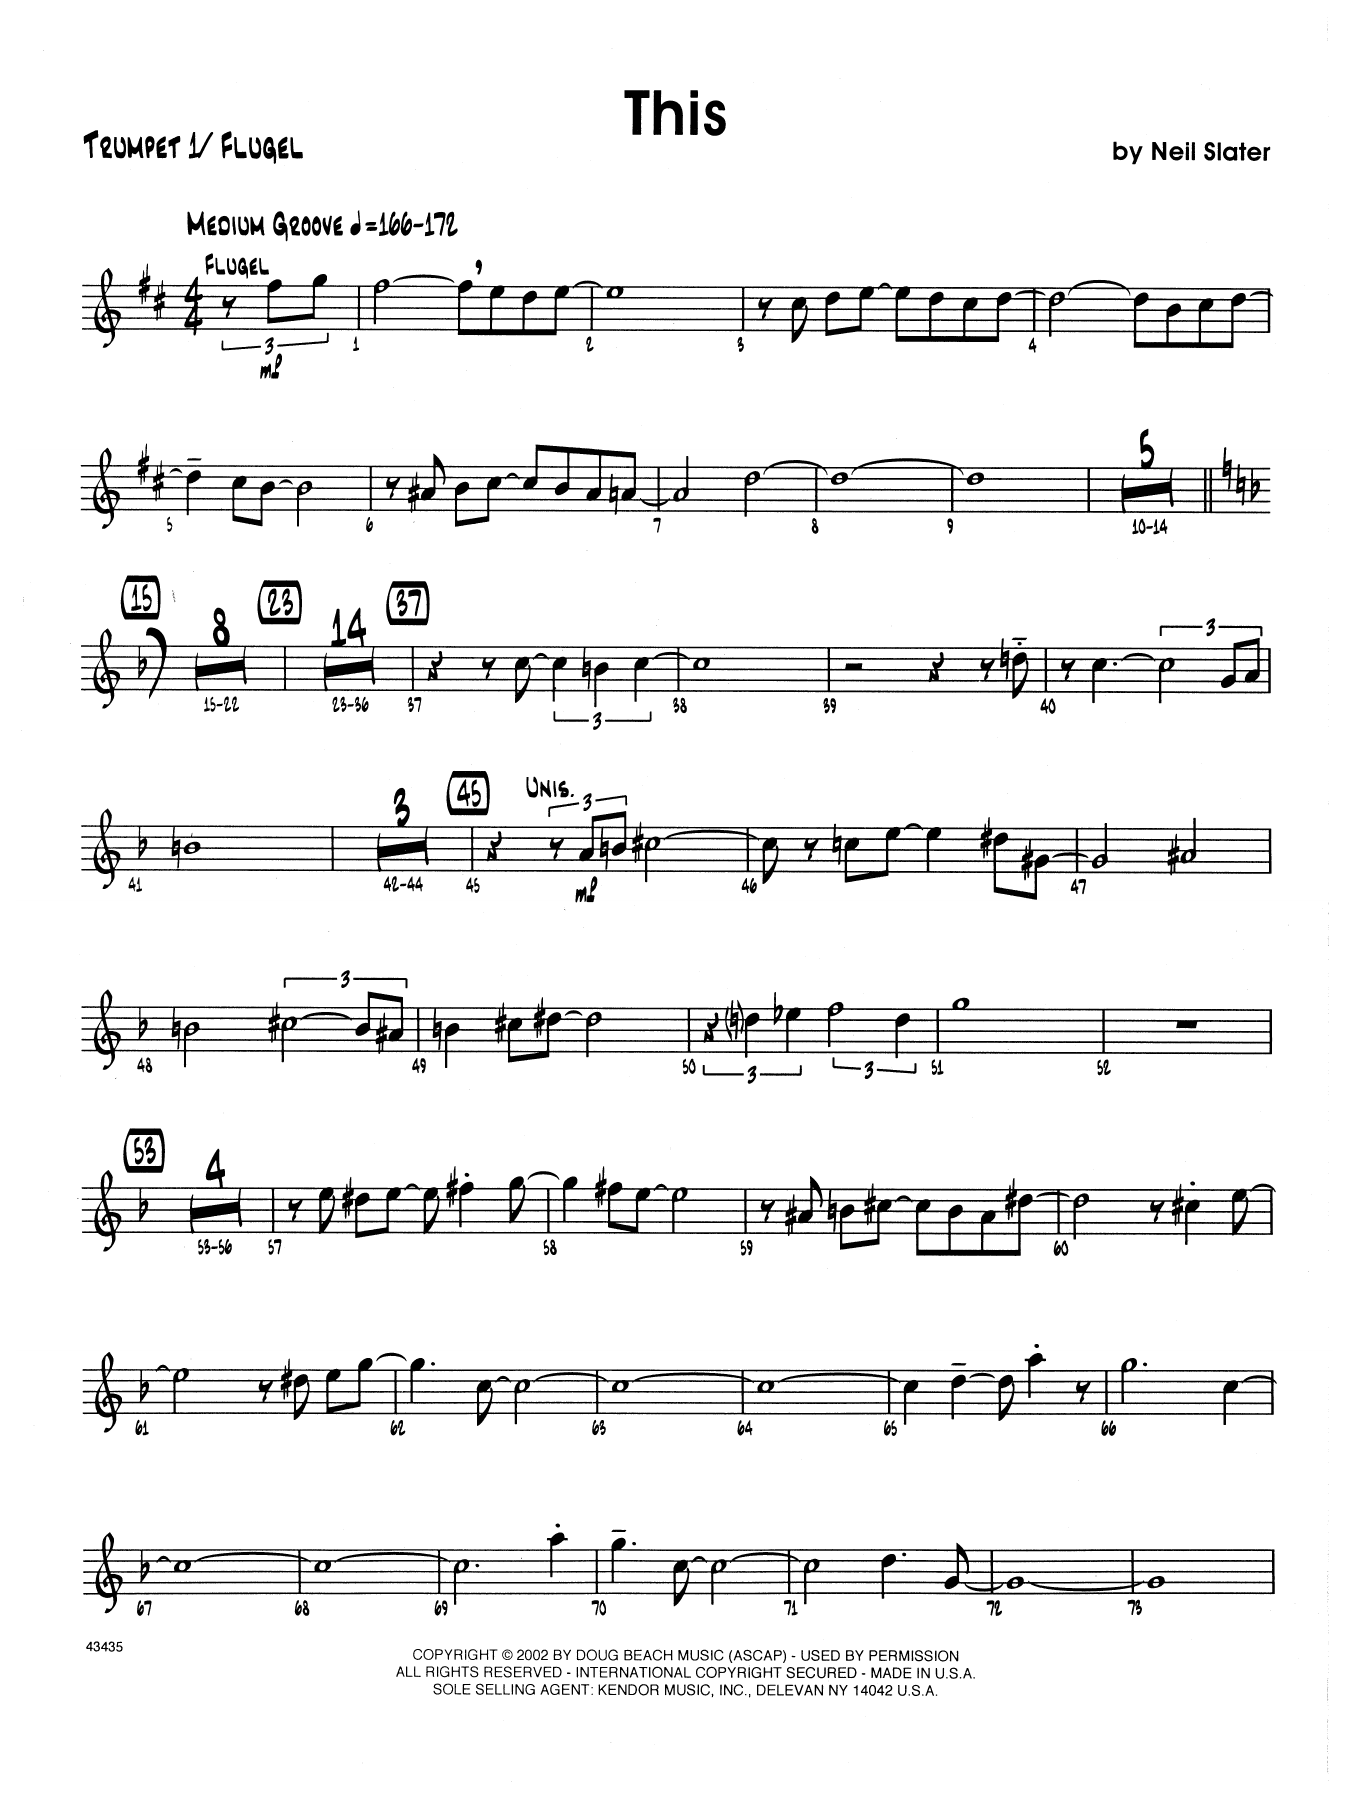 Download Neil Slater This - 1st Bb Trumpet Sheet Music